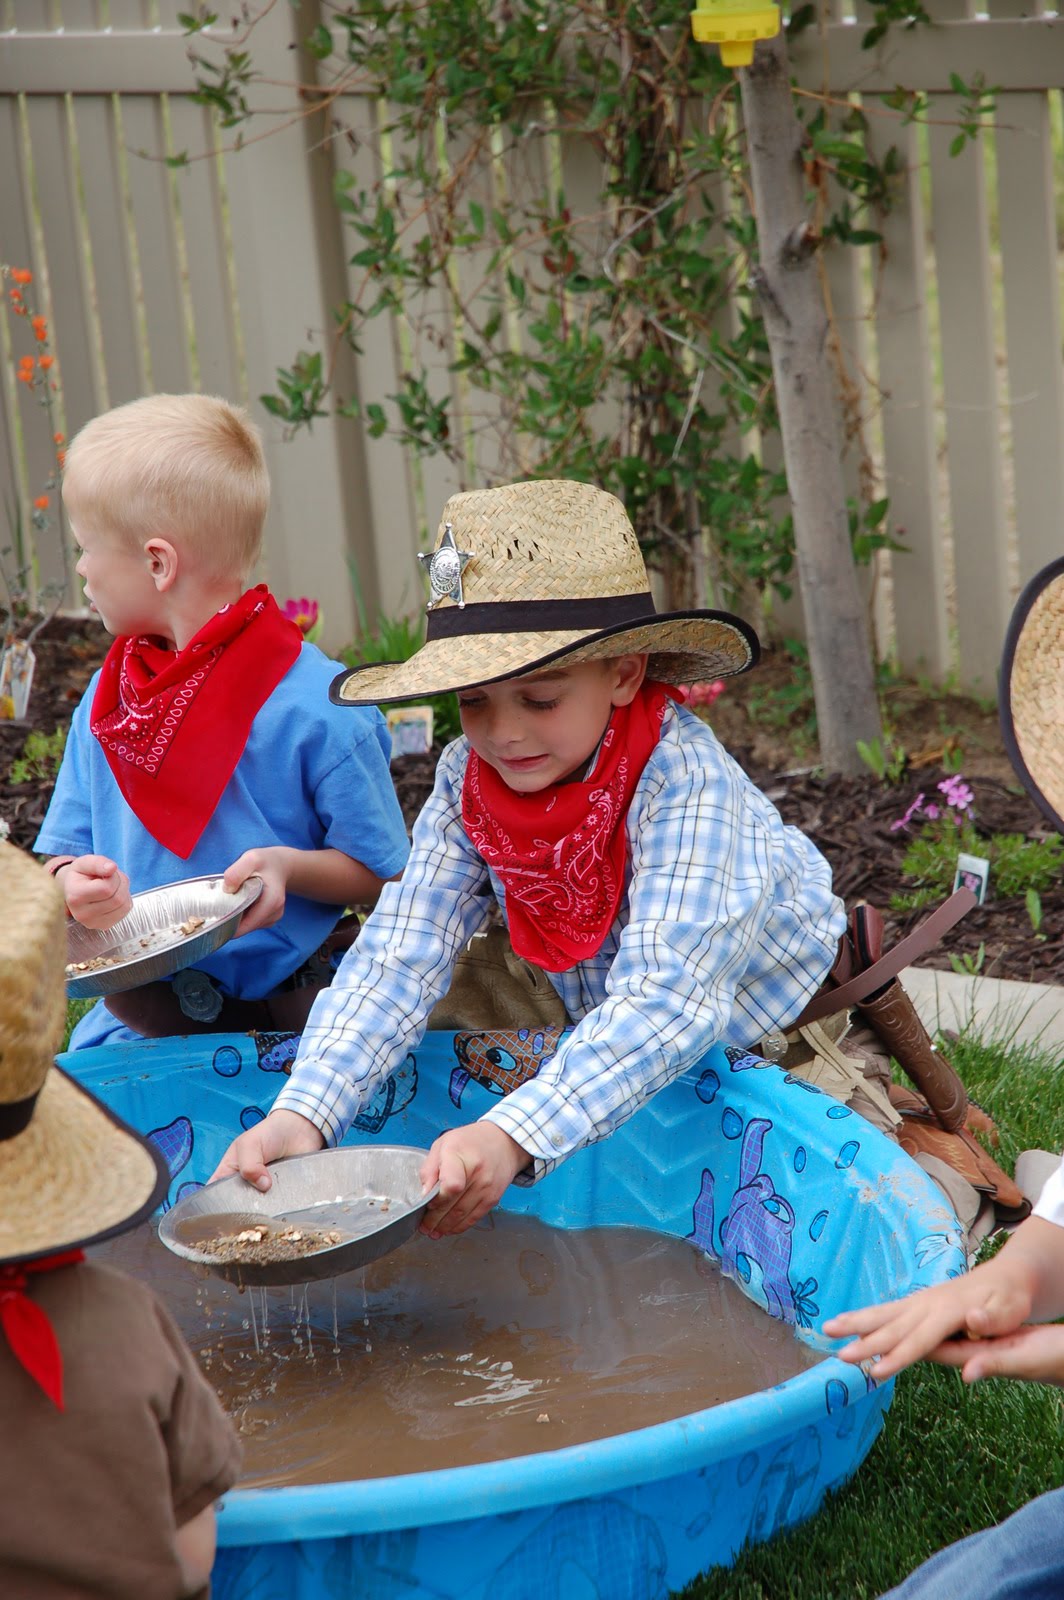 Children dressed as cowboys are sifting through mud in a kiddie pool looking for gold bits.